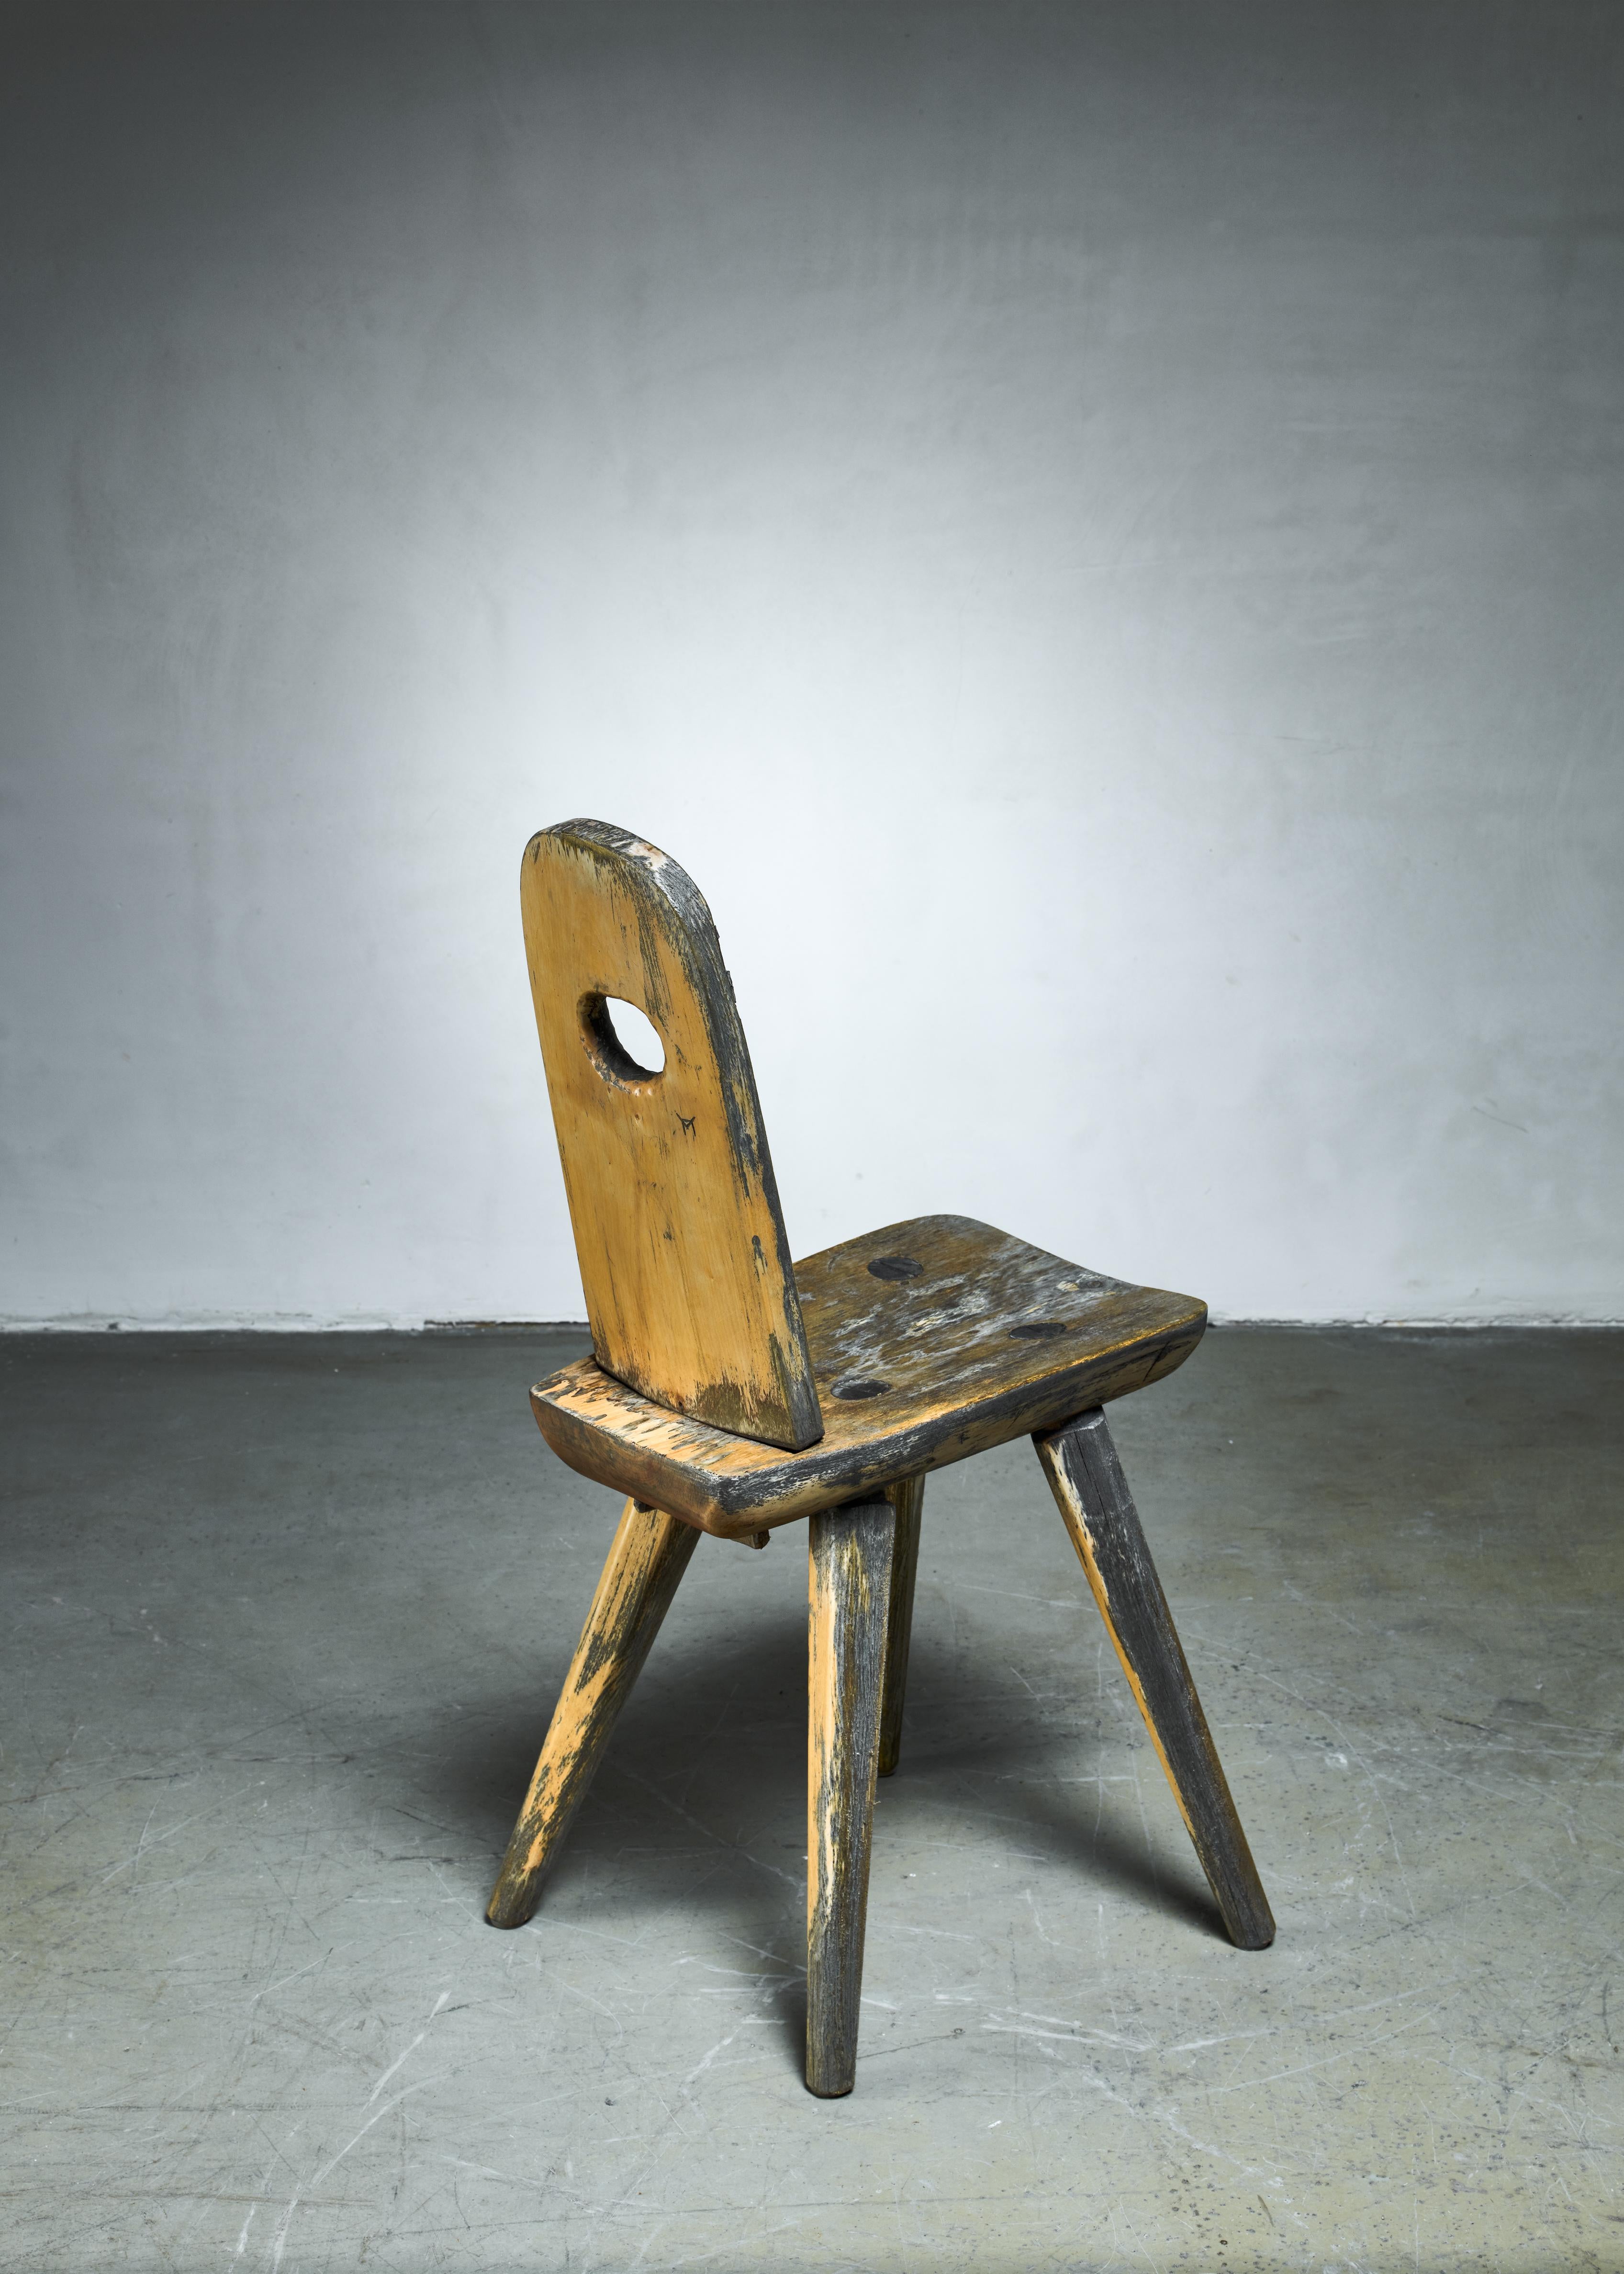 An early 20th century folk art side chair from Sweden, made of partly lacquered wood.

The backrest is fixed with two wooden pins underneath.